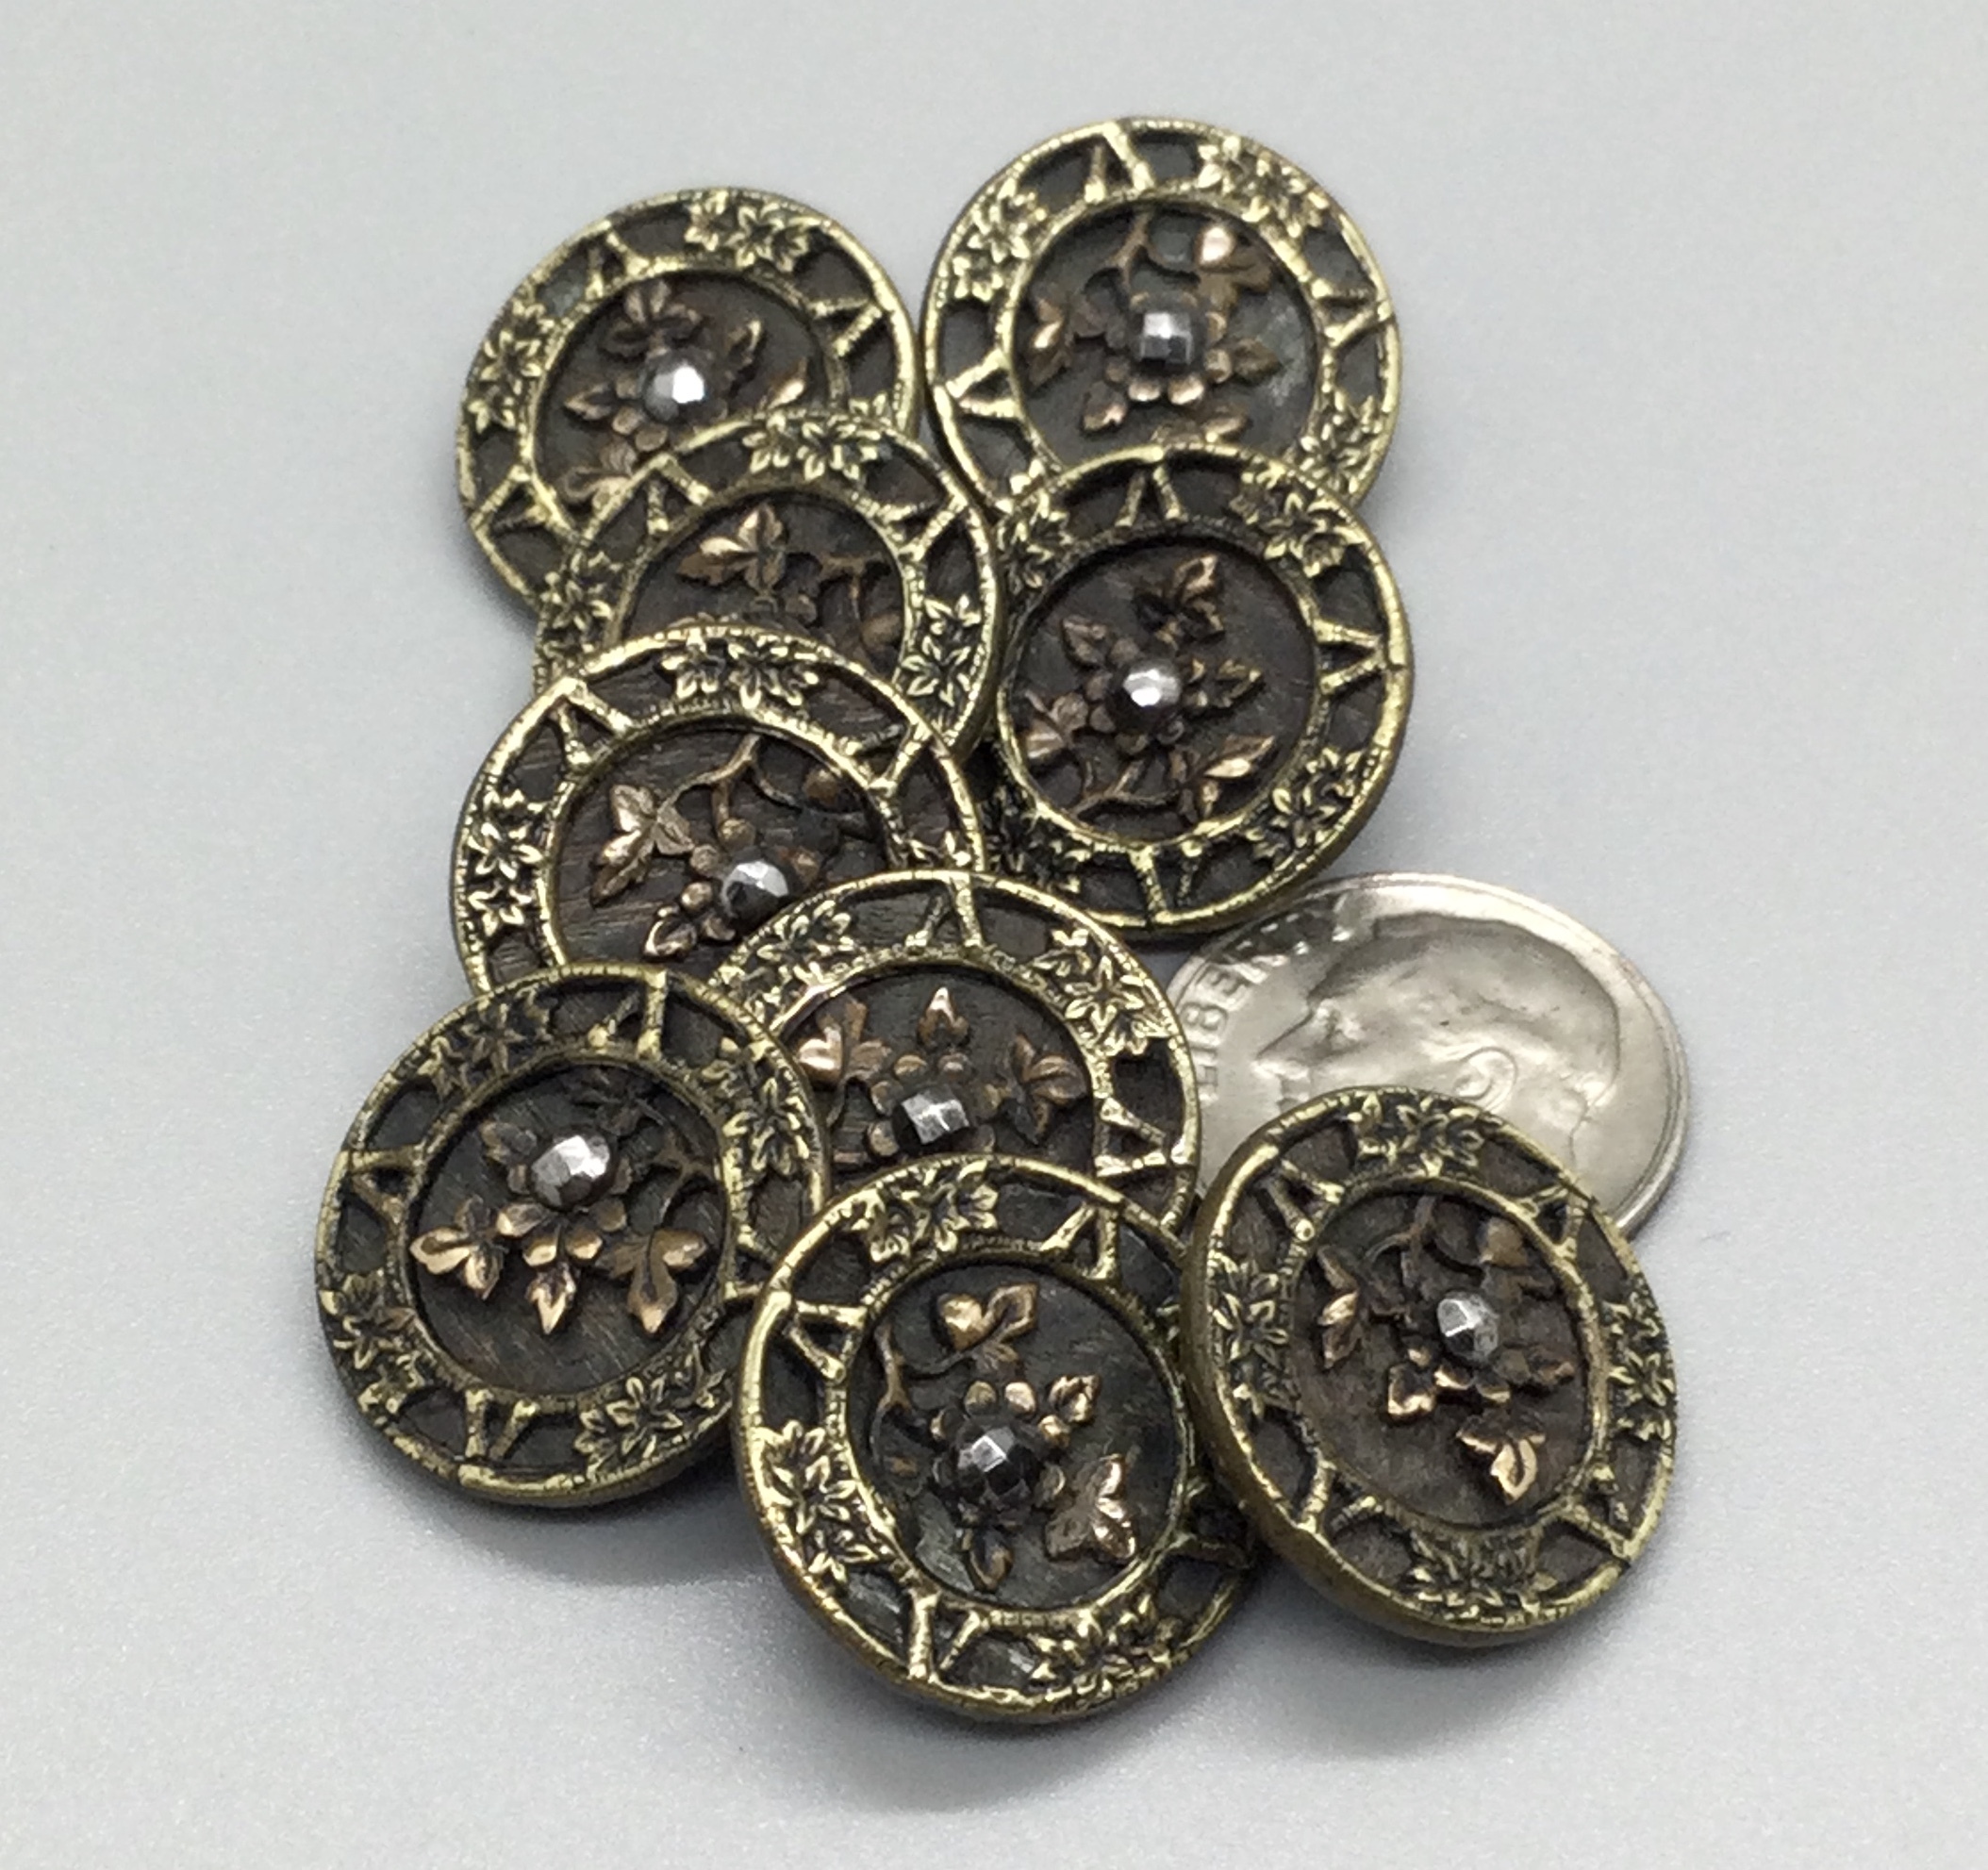 Antique French CUT STEEL Huge Victorian Fancy Button,Detailed FILIGREE  Design,Collectible Buttons,Button for Jewelry,Edwardian Buttons